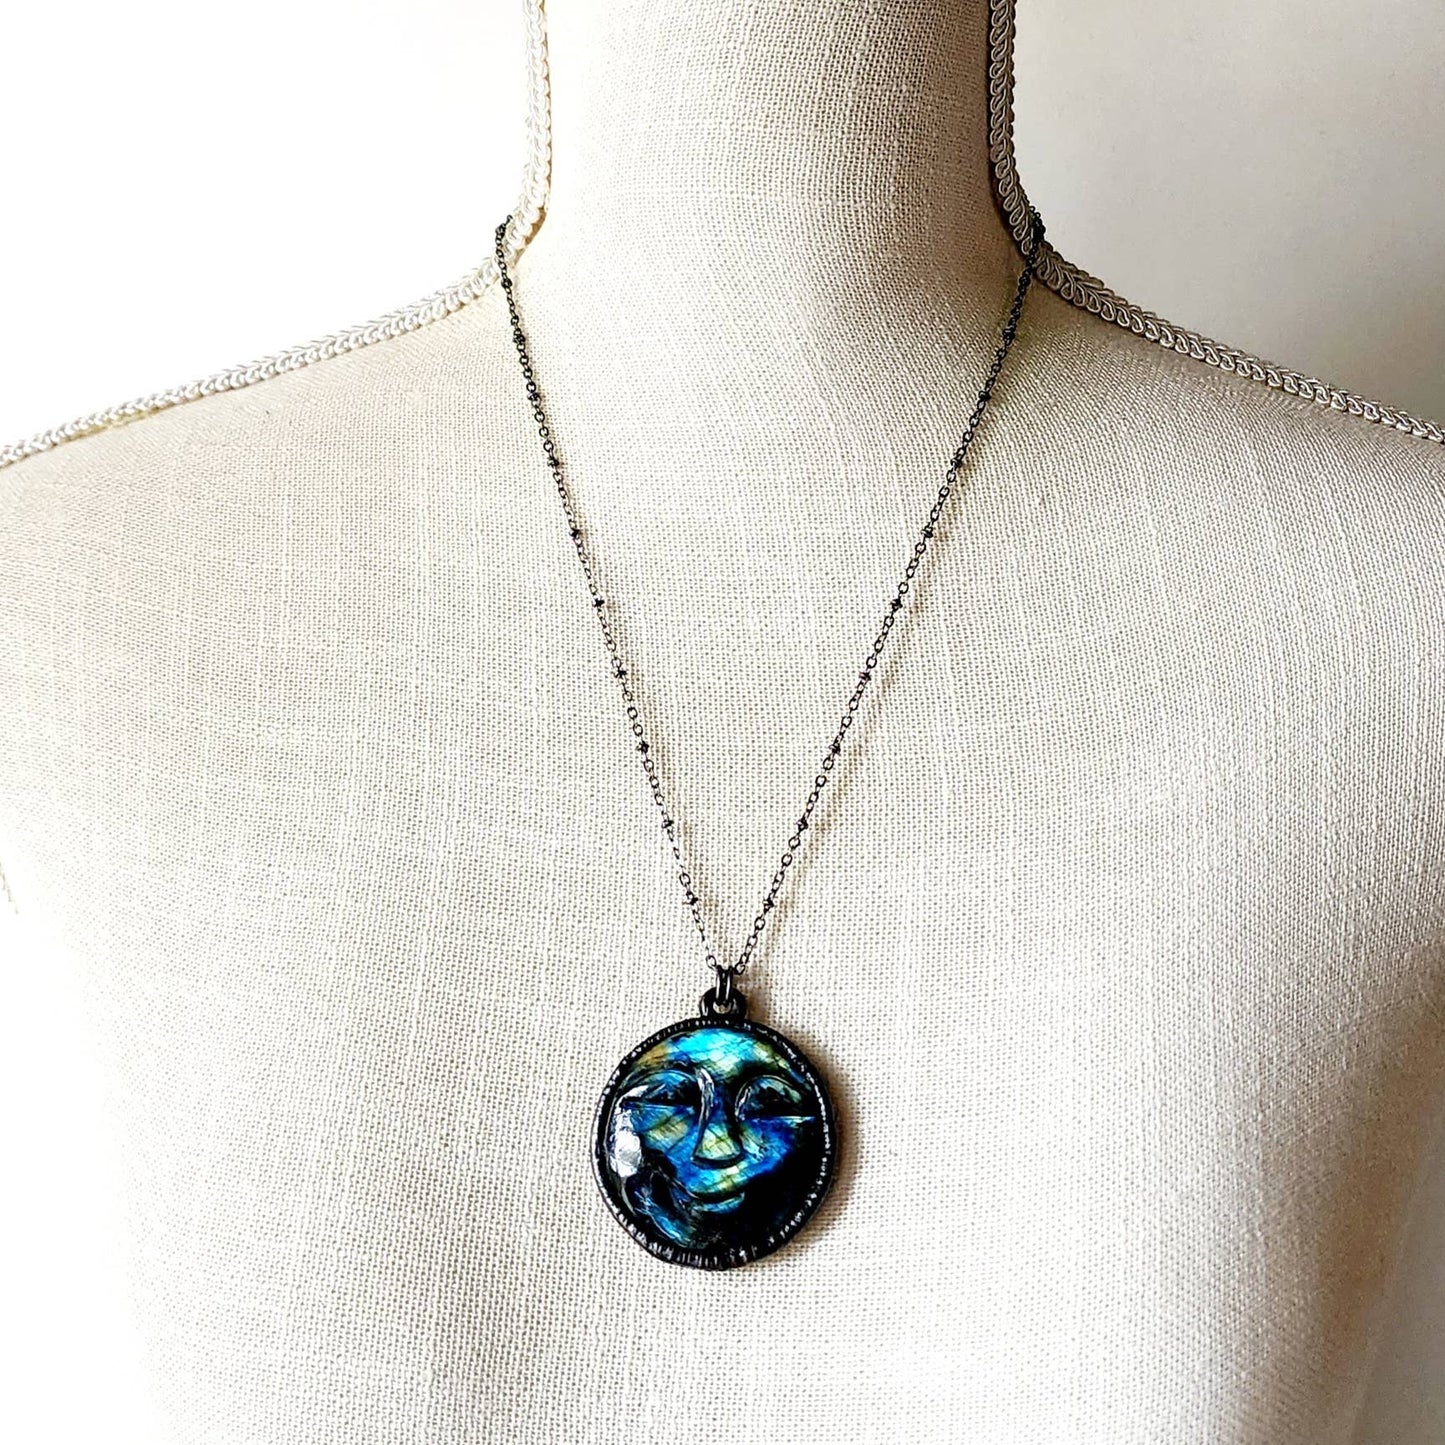 Whimsical Labradorite Full Moon Necklace - F.